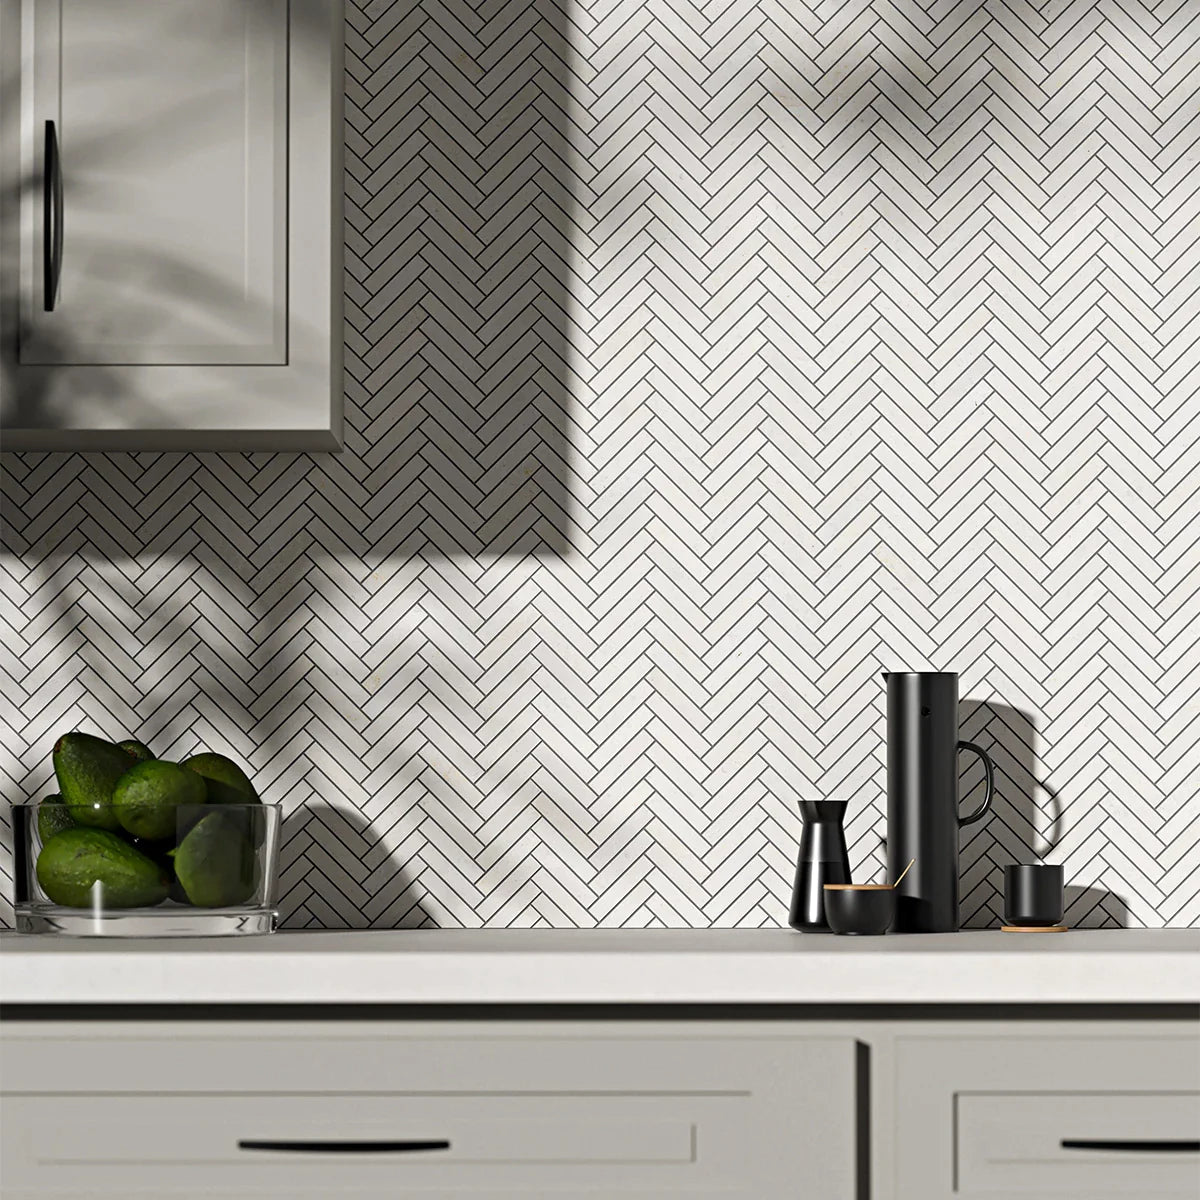 vanilla herringbone marble mosaic 11&5_8x12&3_8x3_8 honed distributed by surface group